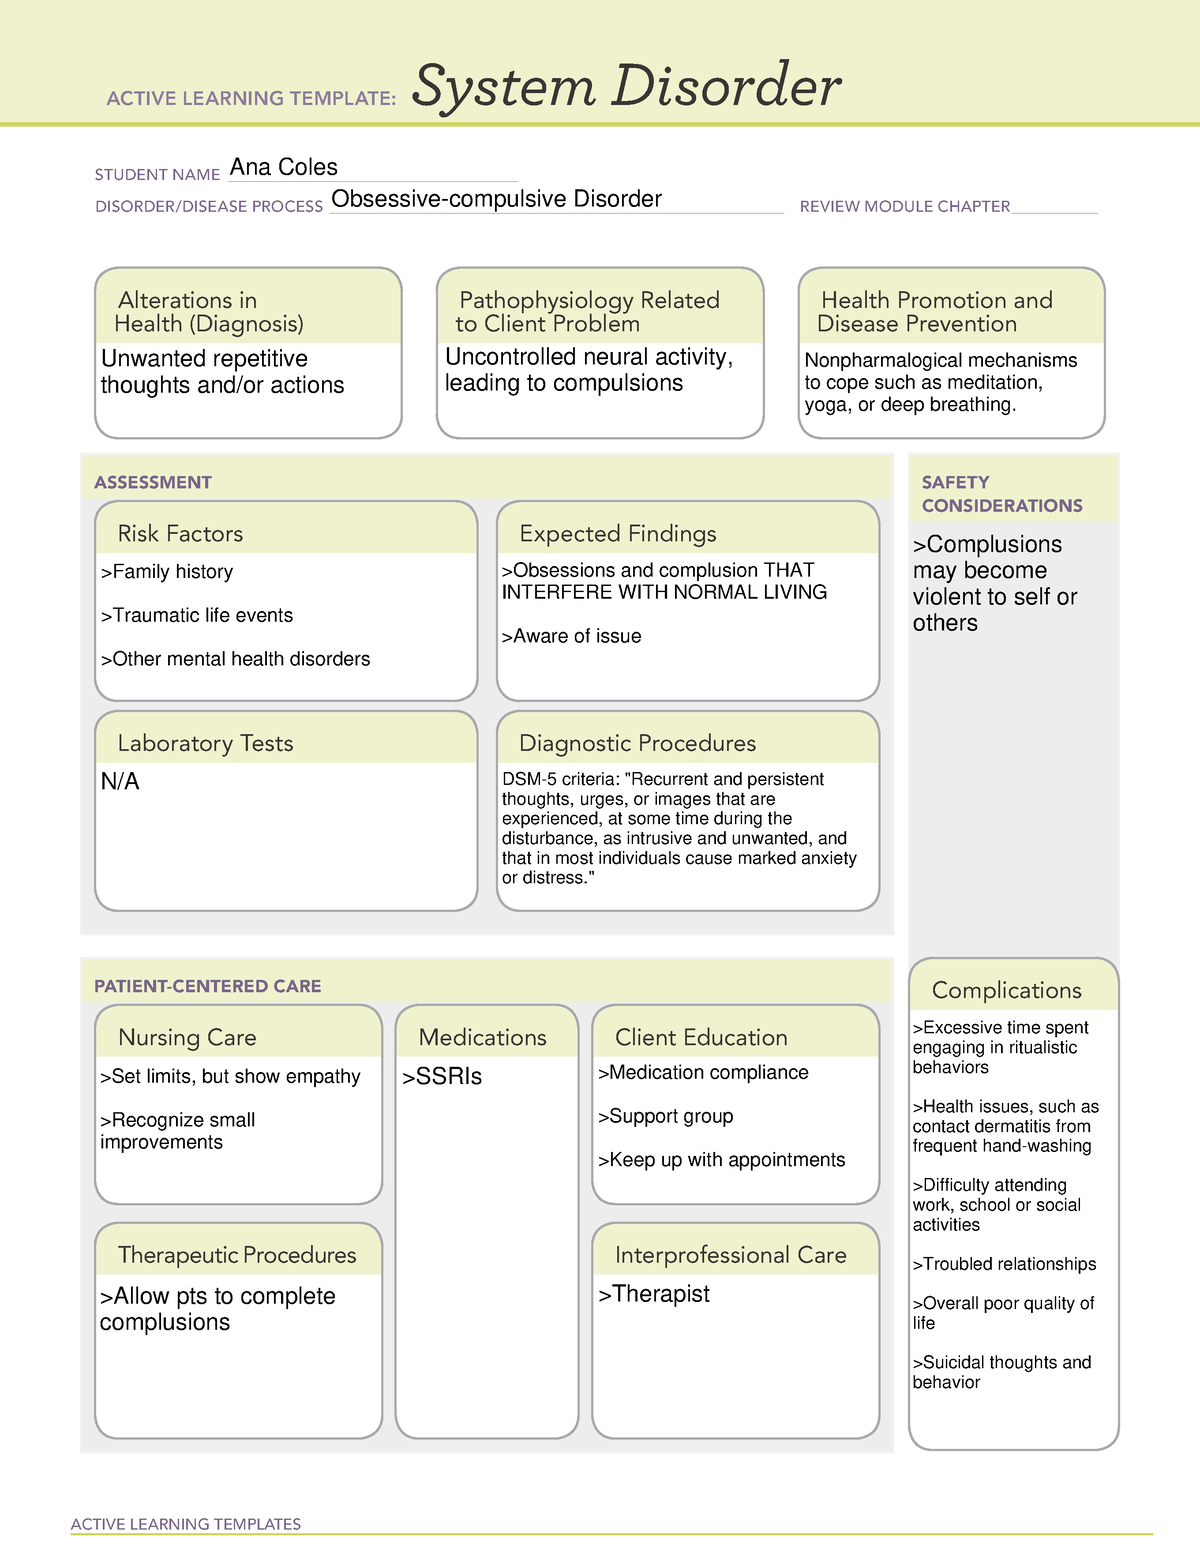 System Disorder OCD - OCD study sheet - ACTIVE LEARNING TEMPLATES ...